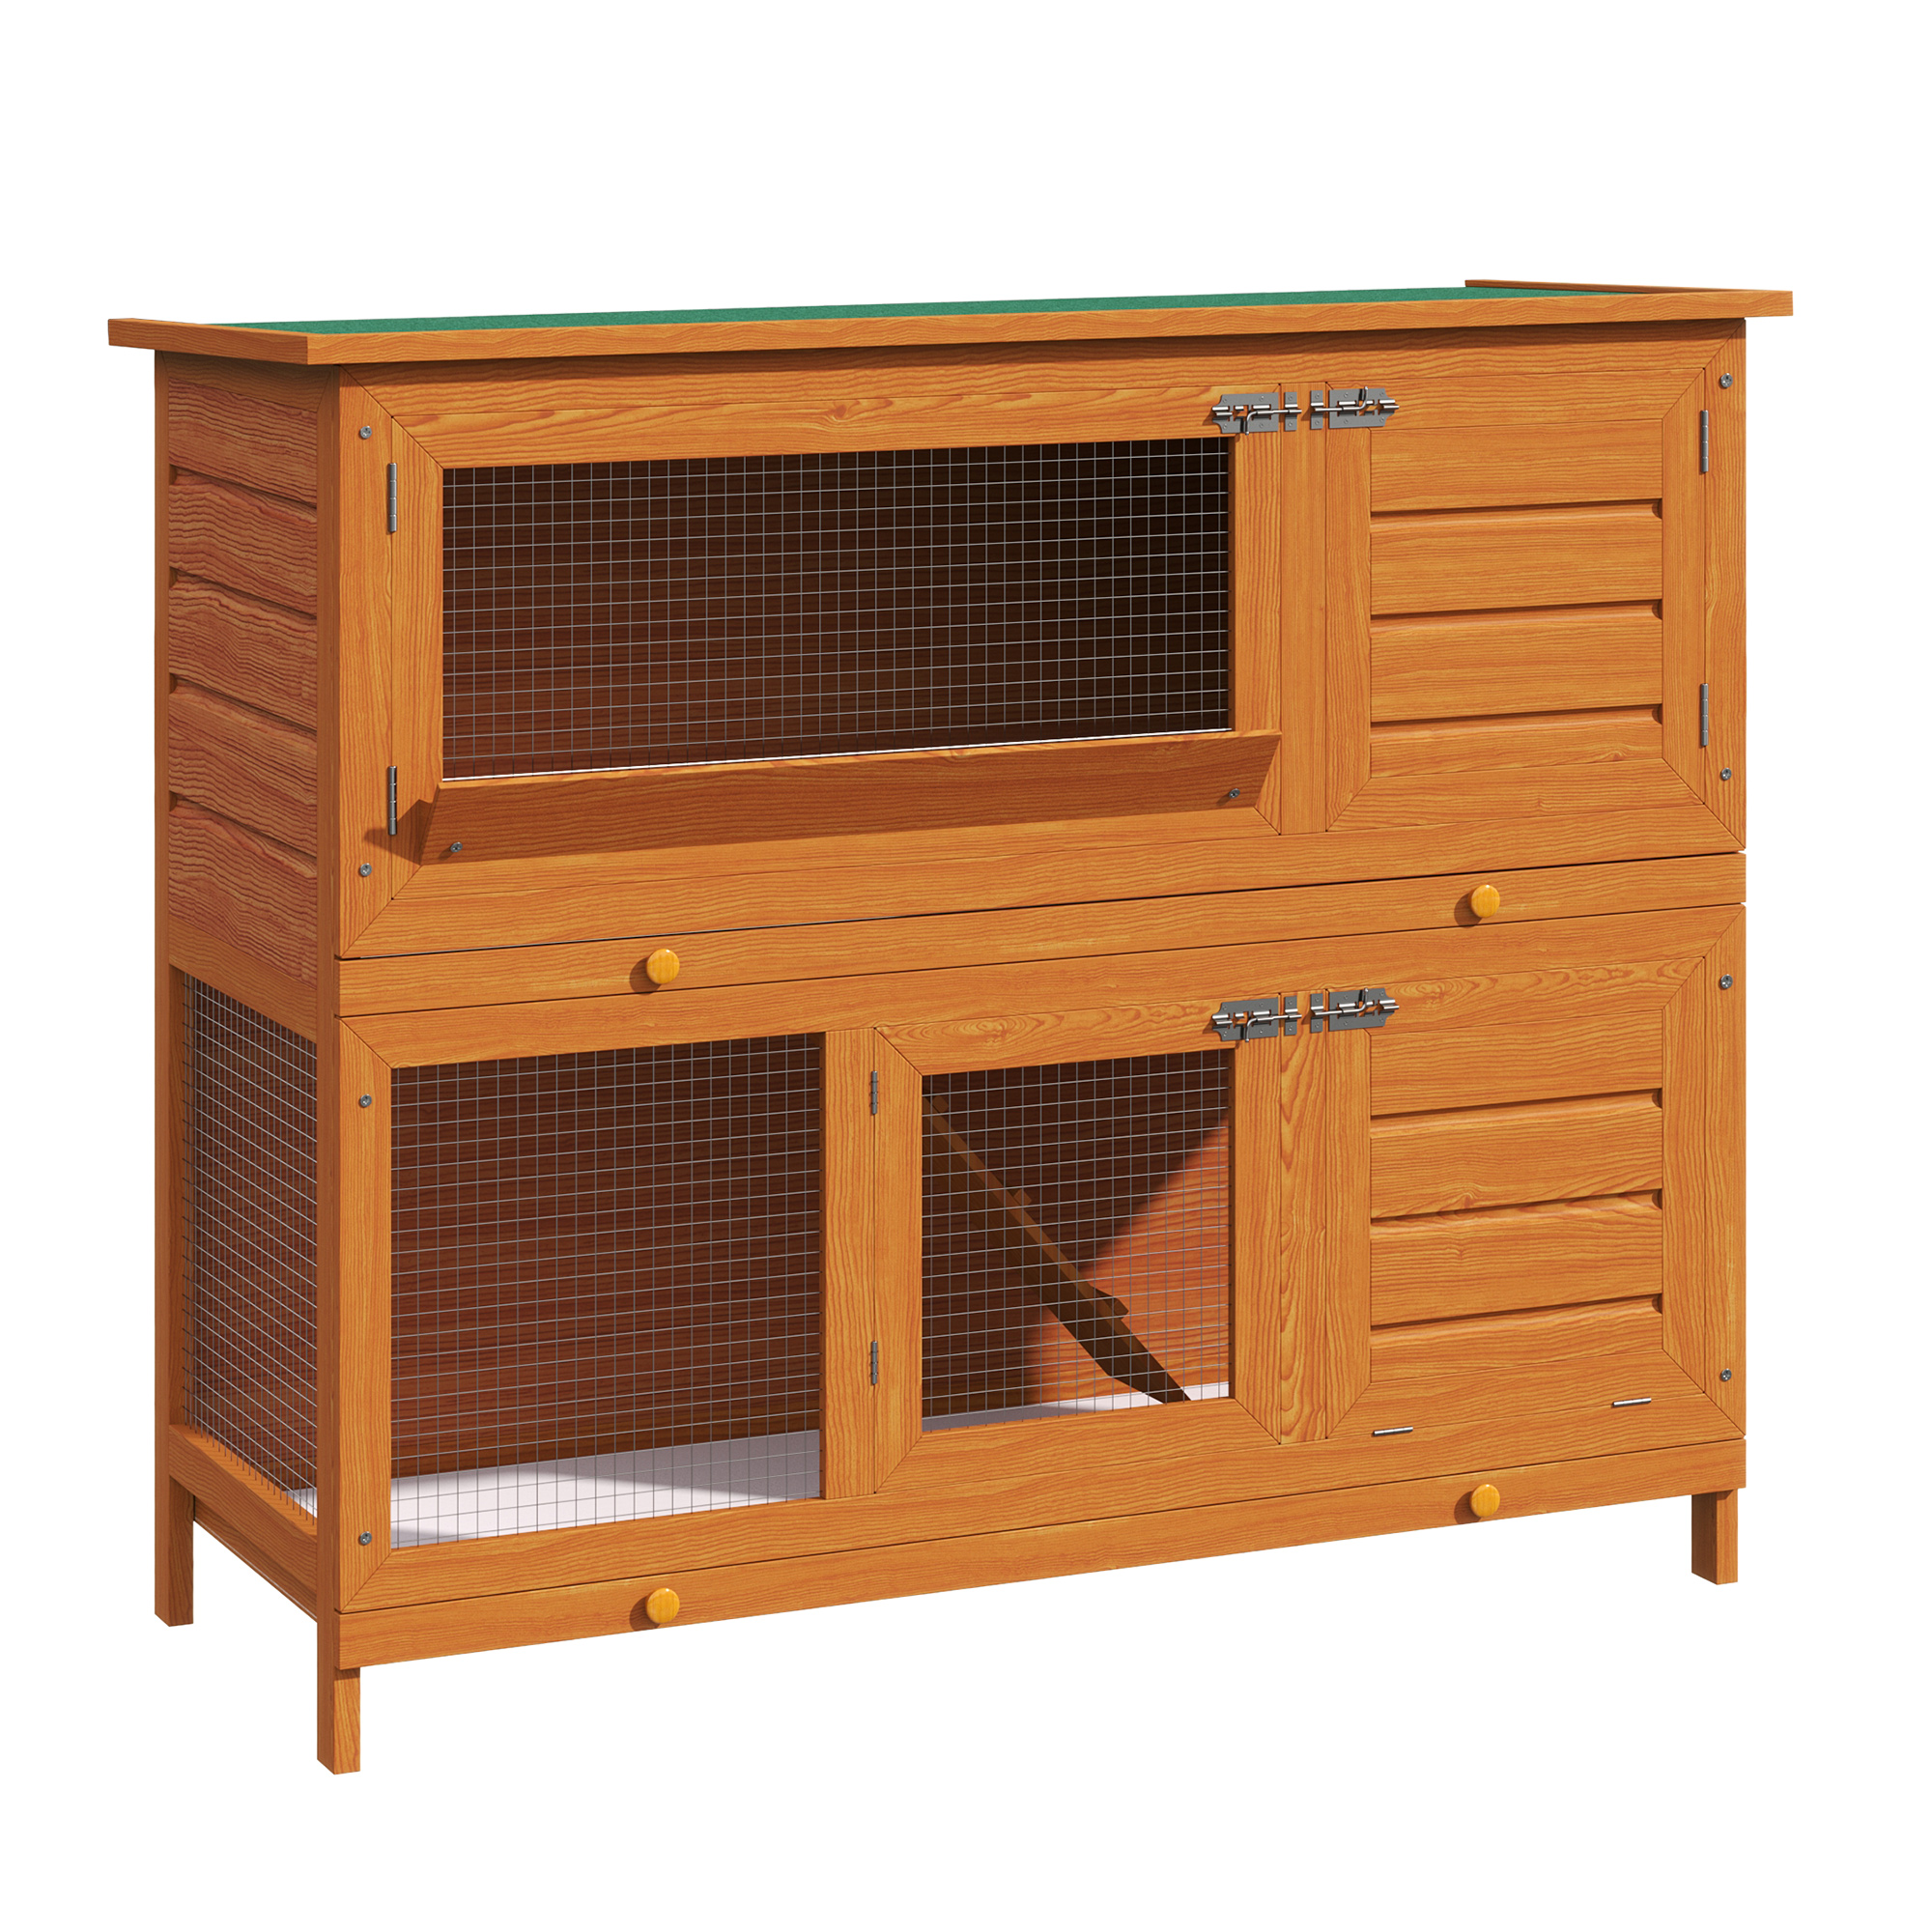 2 Tier Elevated Wooden Rabbit Hutch Bunny House